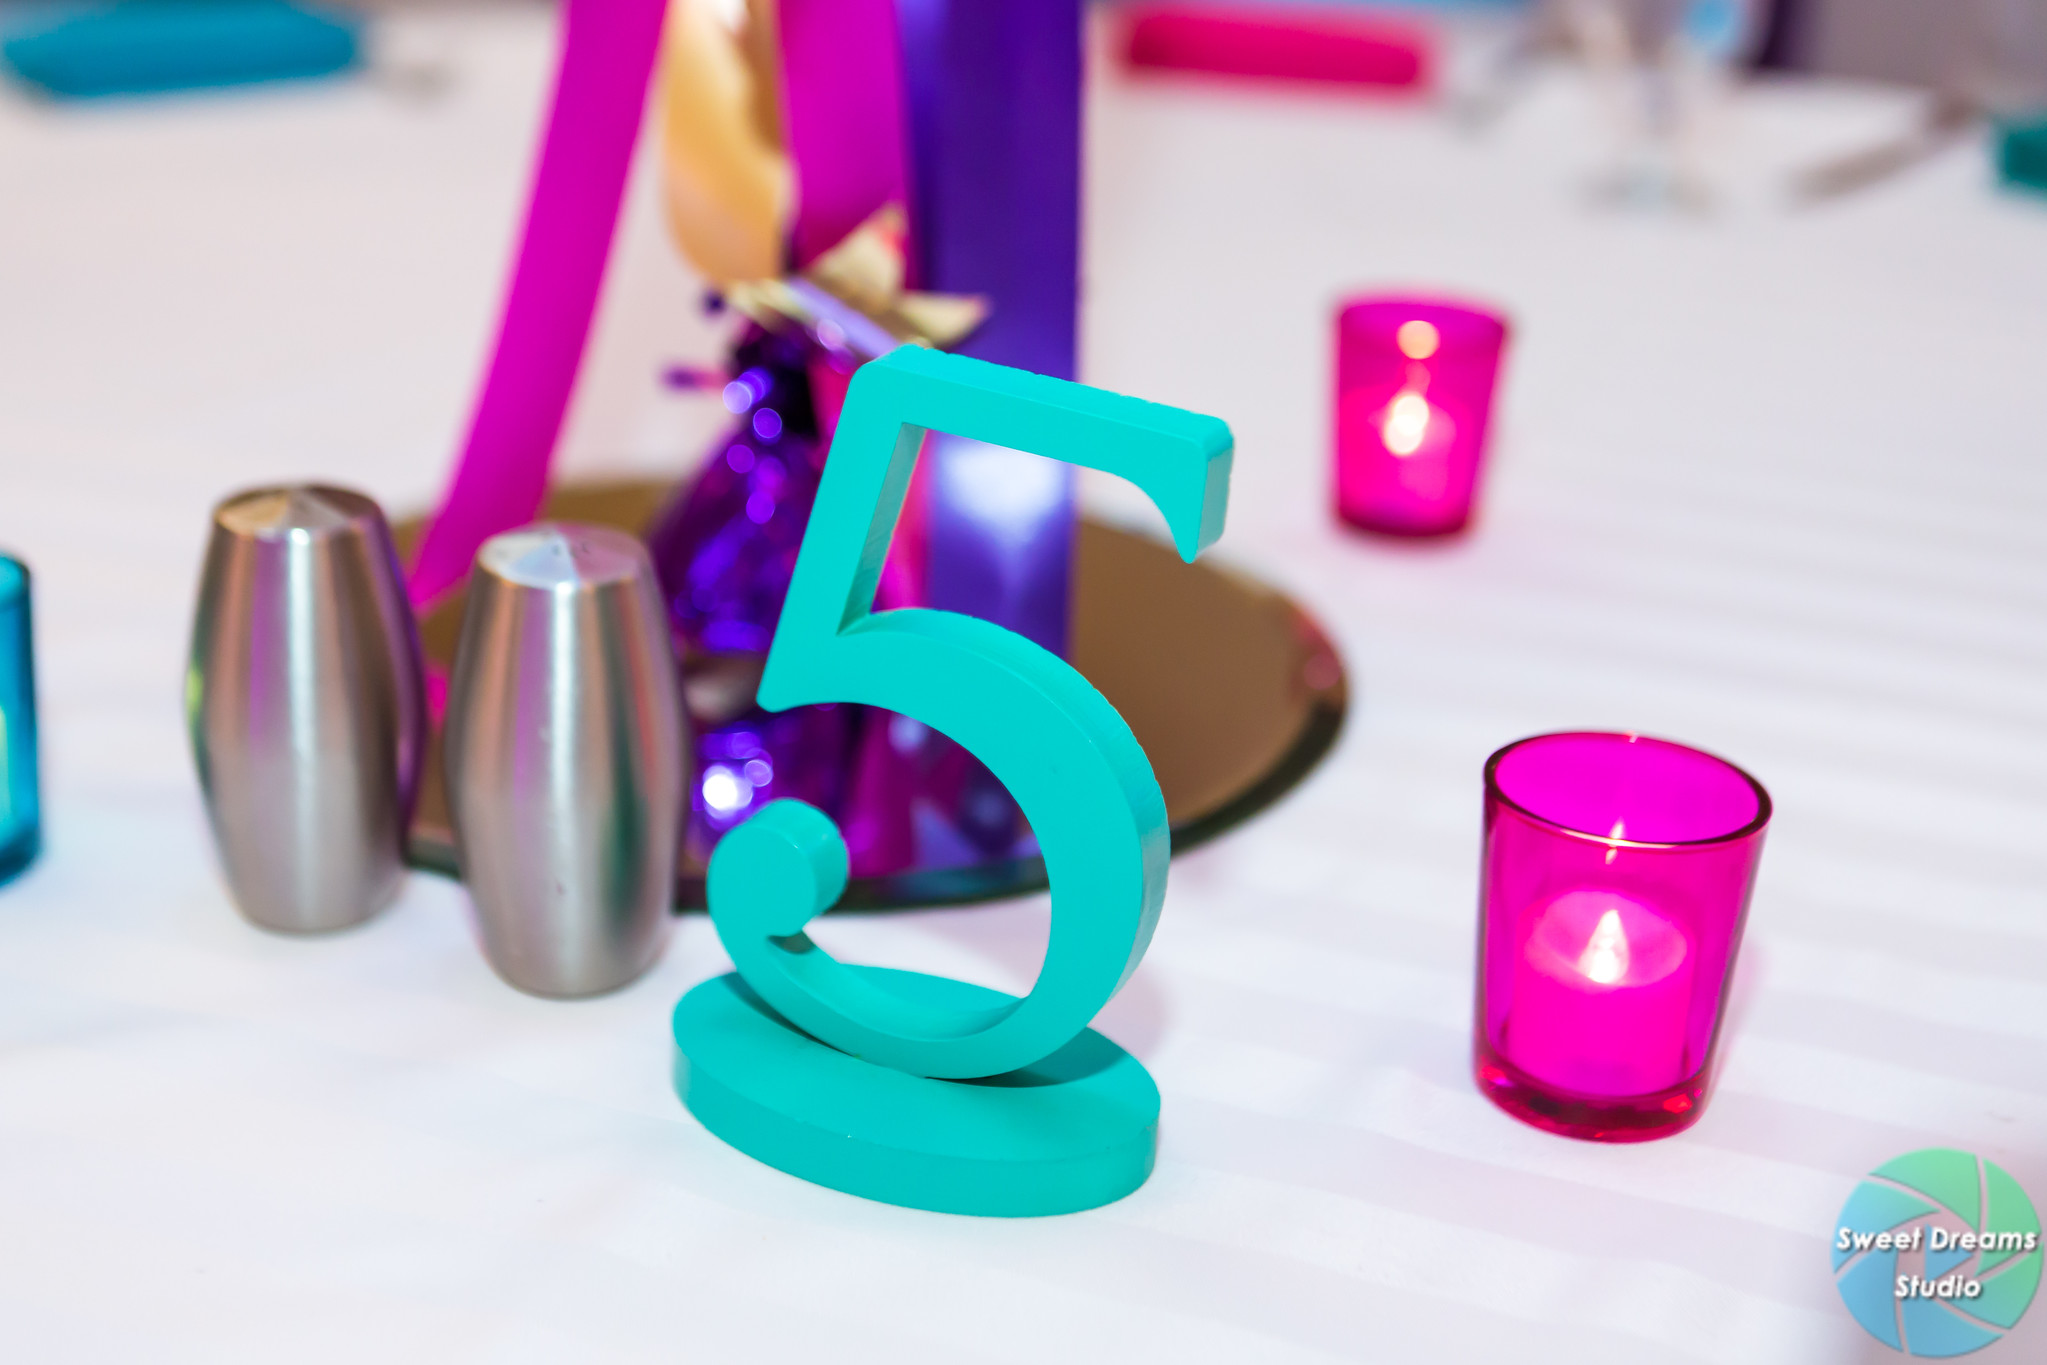 Liv it Up table number at Olivia's colorful, jewel-toned, balloon-filled Bat Mitzvah party at Hyatt Regency Dulles. Pink, purple, teal, turquoise and gold. | Pop Color Events | Adding a pop of color to Bar & Bat Mitzvahs in DC, MD & VA | Photo by Sweet Dreams Studios